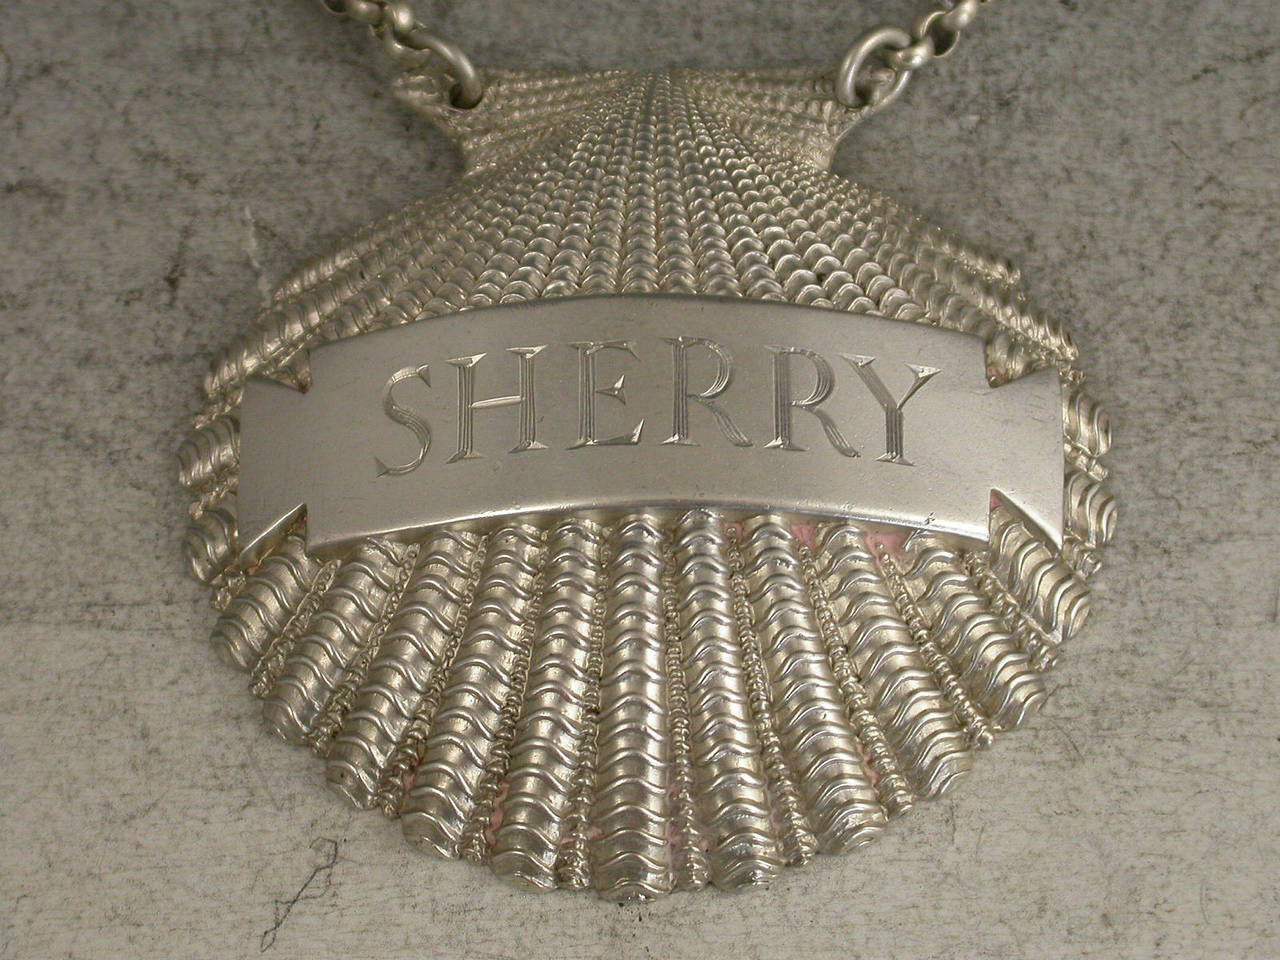 A fine quality and rare George III heavy cast silver wine label made in the form of a scallop shell, the applied name plate incised for Sherry. 

By Benjamin Smith, London, 1807

In fine condition with no damage or repair

Measures: Height 51